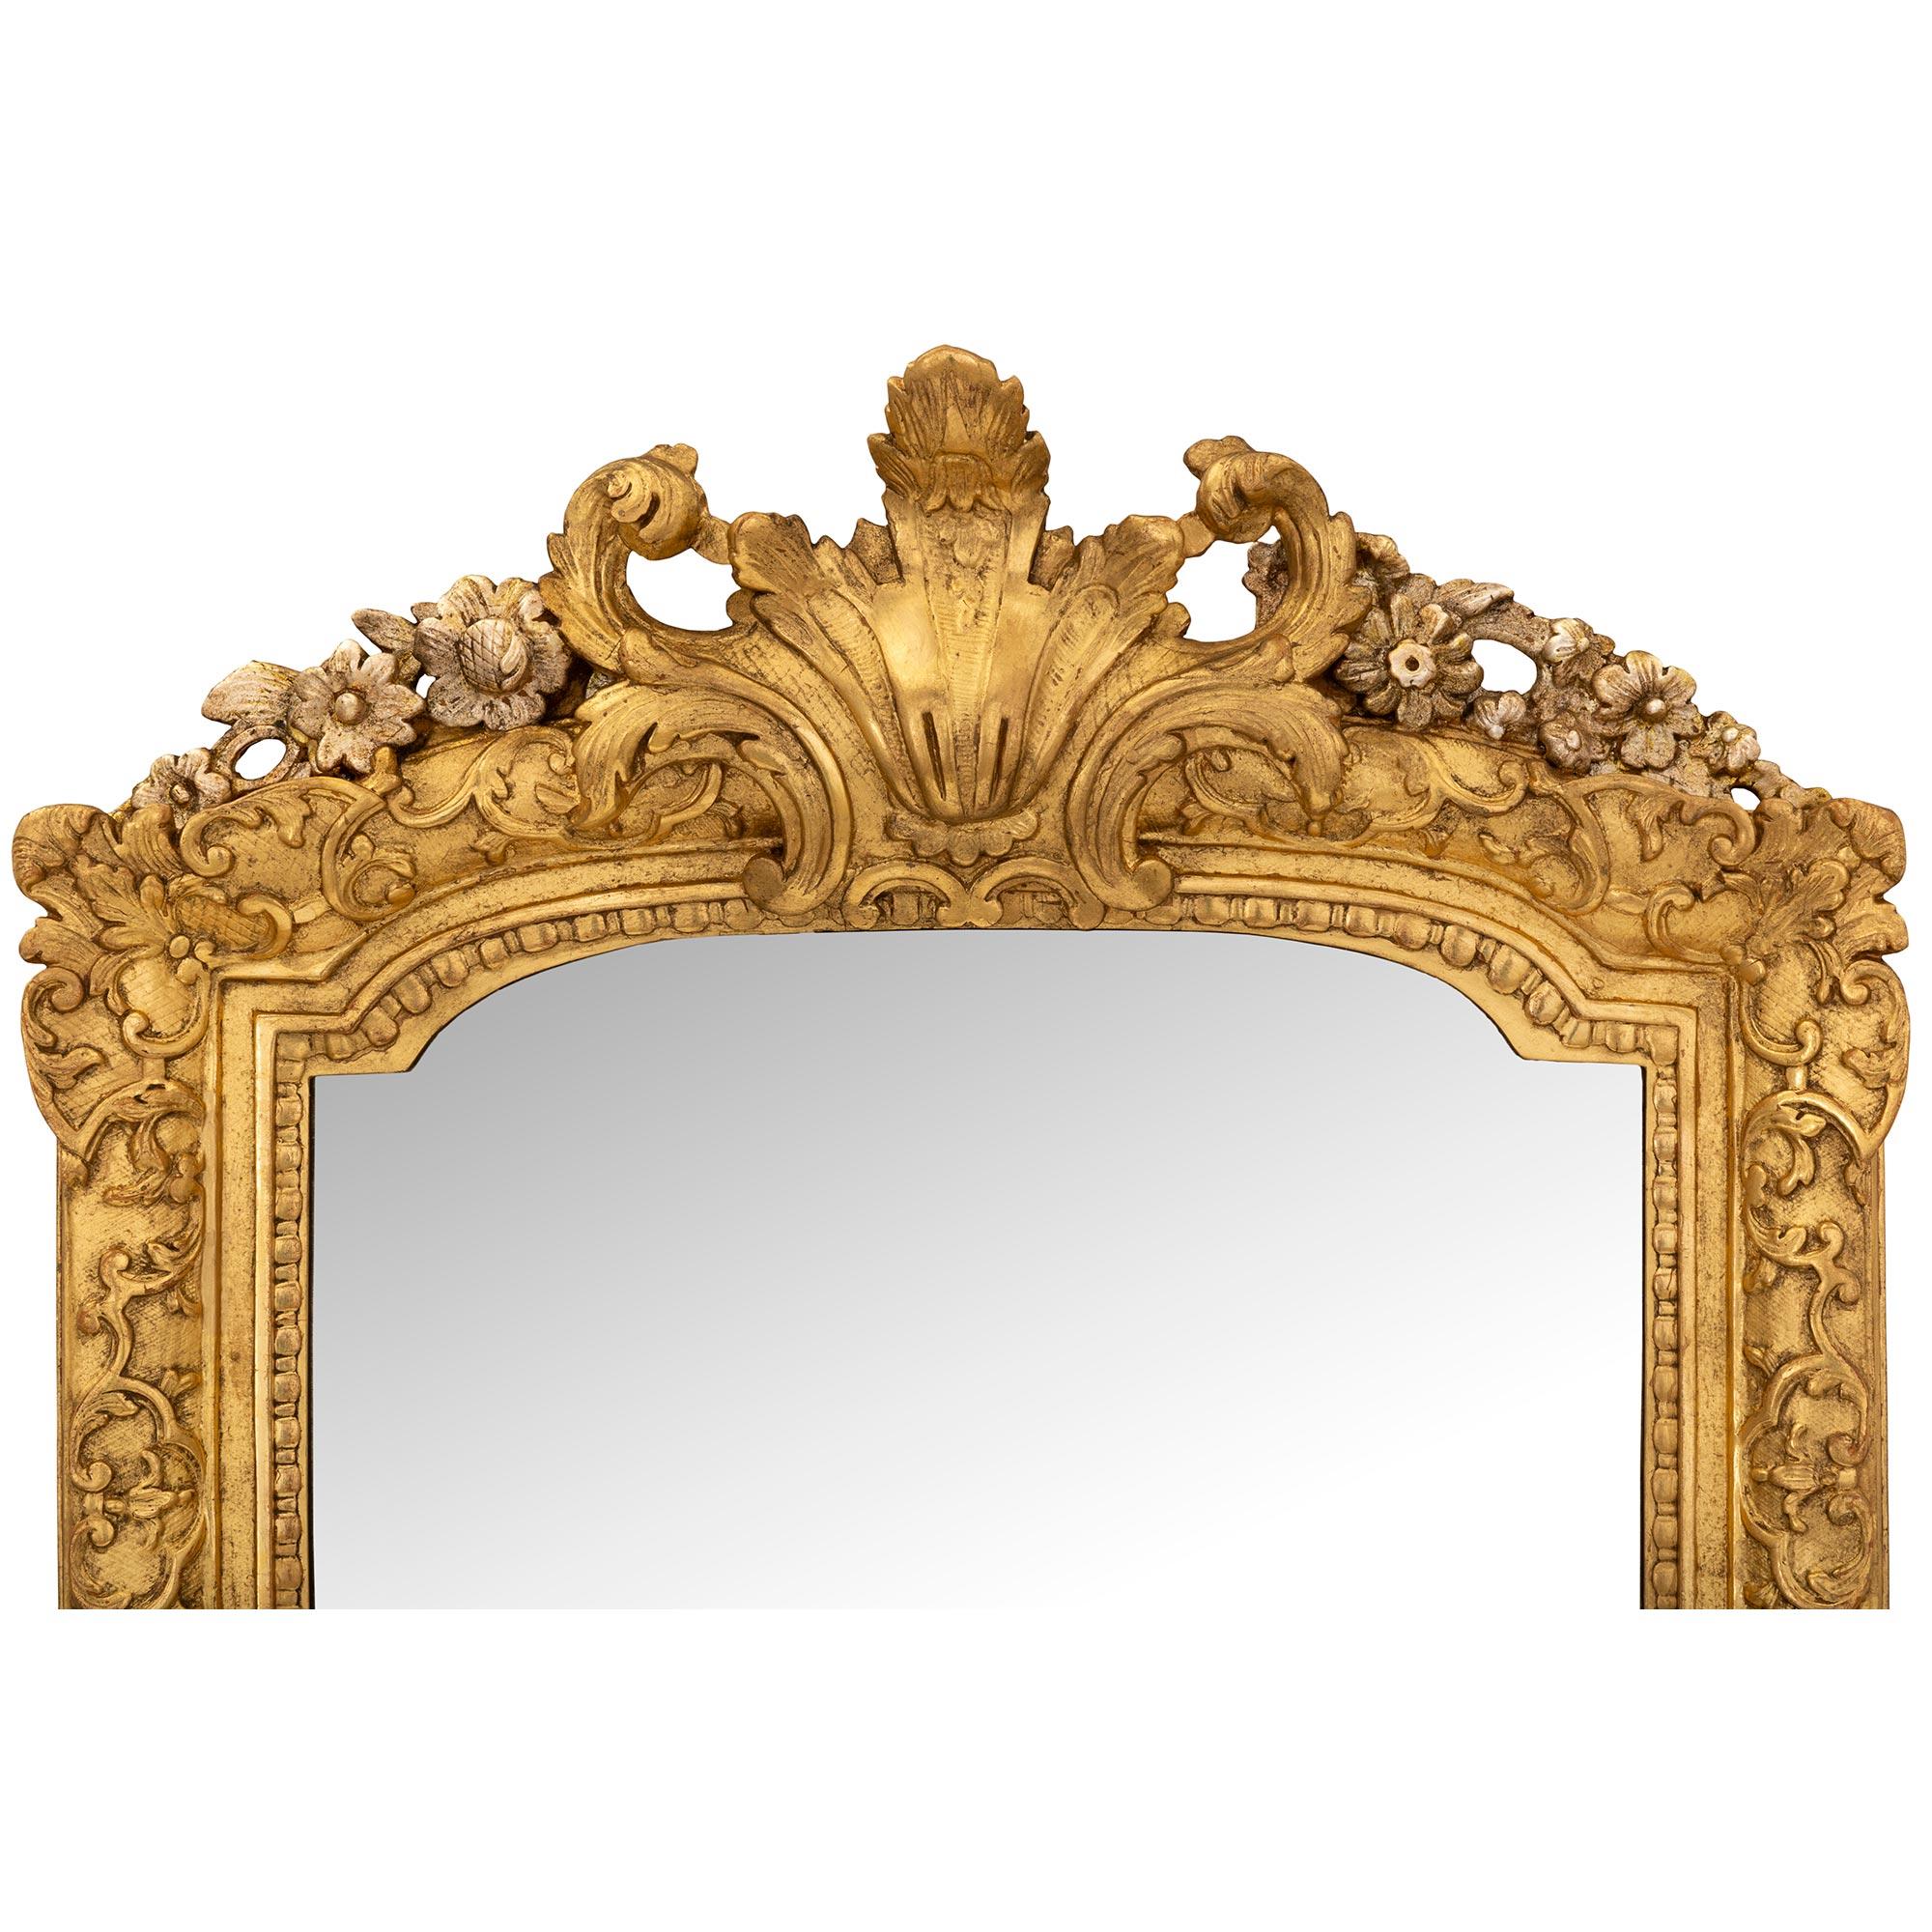 French Early 18th Century Régence Period Giltwood and Mecca Mirror In Good Condition For Sale In West Palm Beach, FL